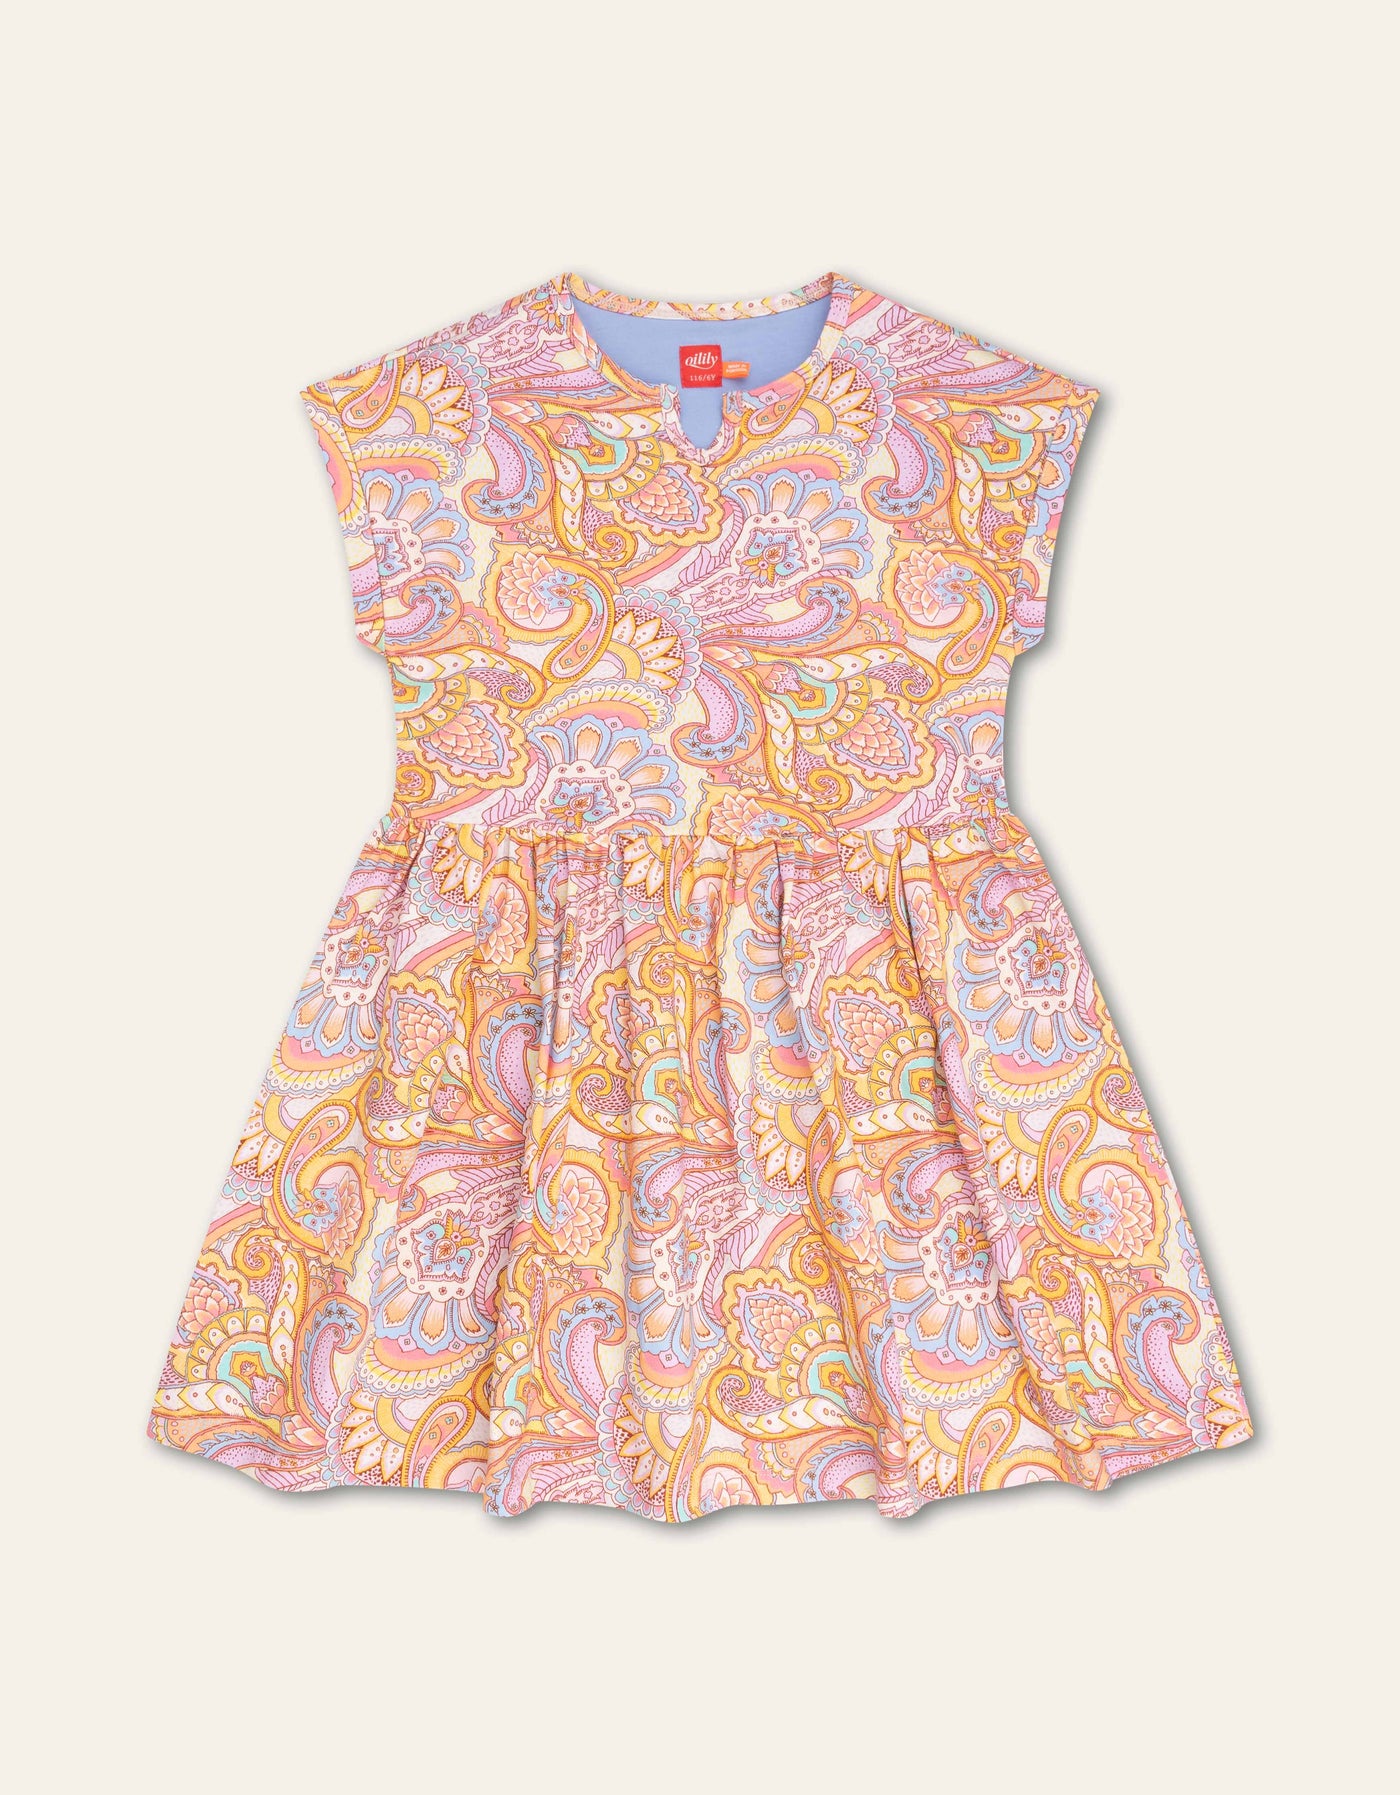 paisley Jersey Dieke Dress by Oilily